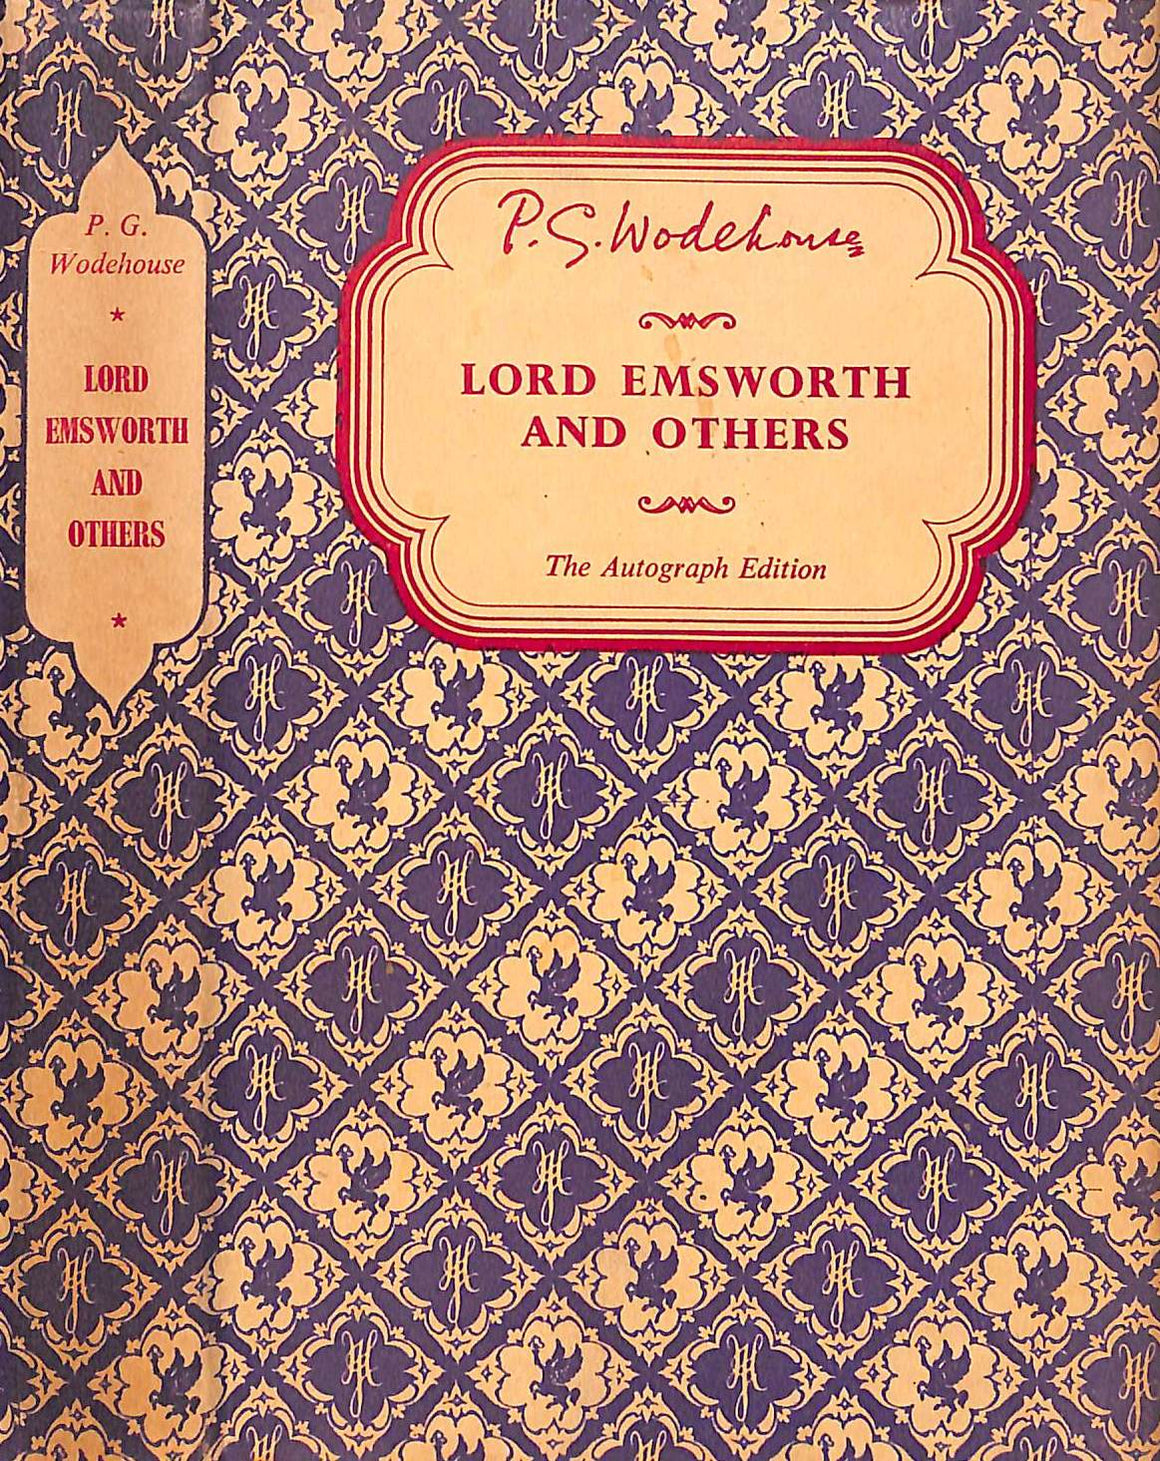 "Lord Emsworth And Others" 1956 WODEHOUSE, P.G.